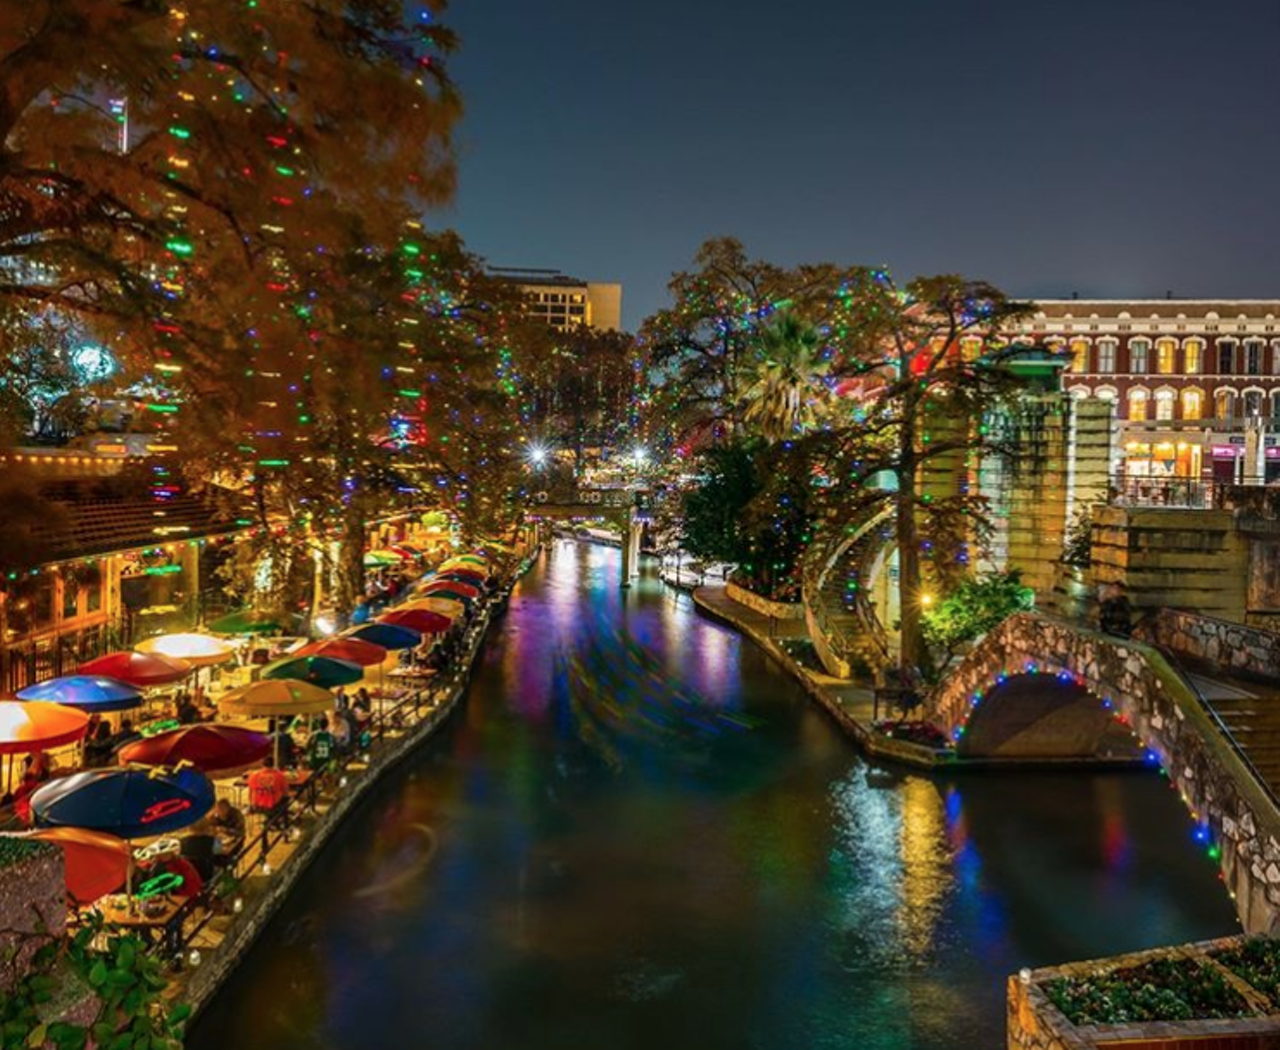 The River Walk
849 E Commerce Street, (210) 227-4262, thesanantonioriverwalk.com
Want a super romantic date idea that won’t break the bank? Take your boo to the River Walk and fall in love with the lights. While the lights will be on every night through January 6, you can also catch fun events like the Ford Fiesta de las Luminarias on select weekends. There’s also boat caroling on some nights throughout December.
Photo via Instagram / visitsanantonio